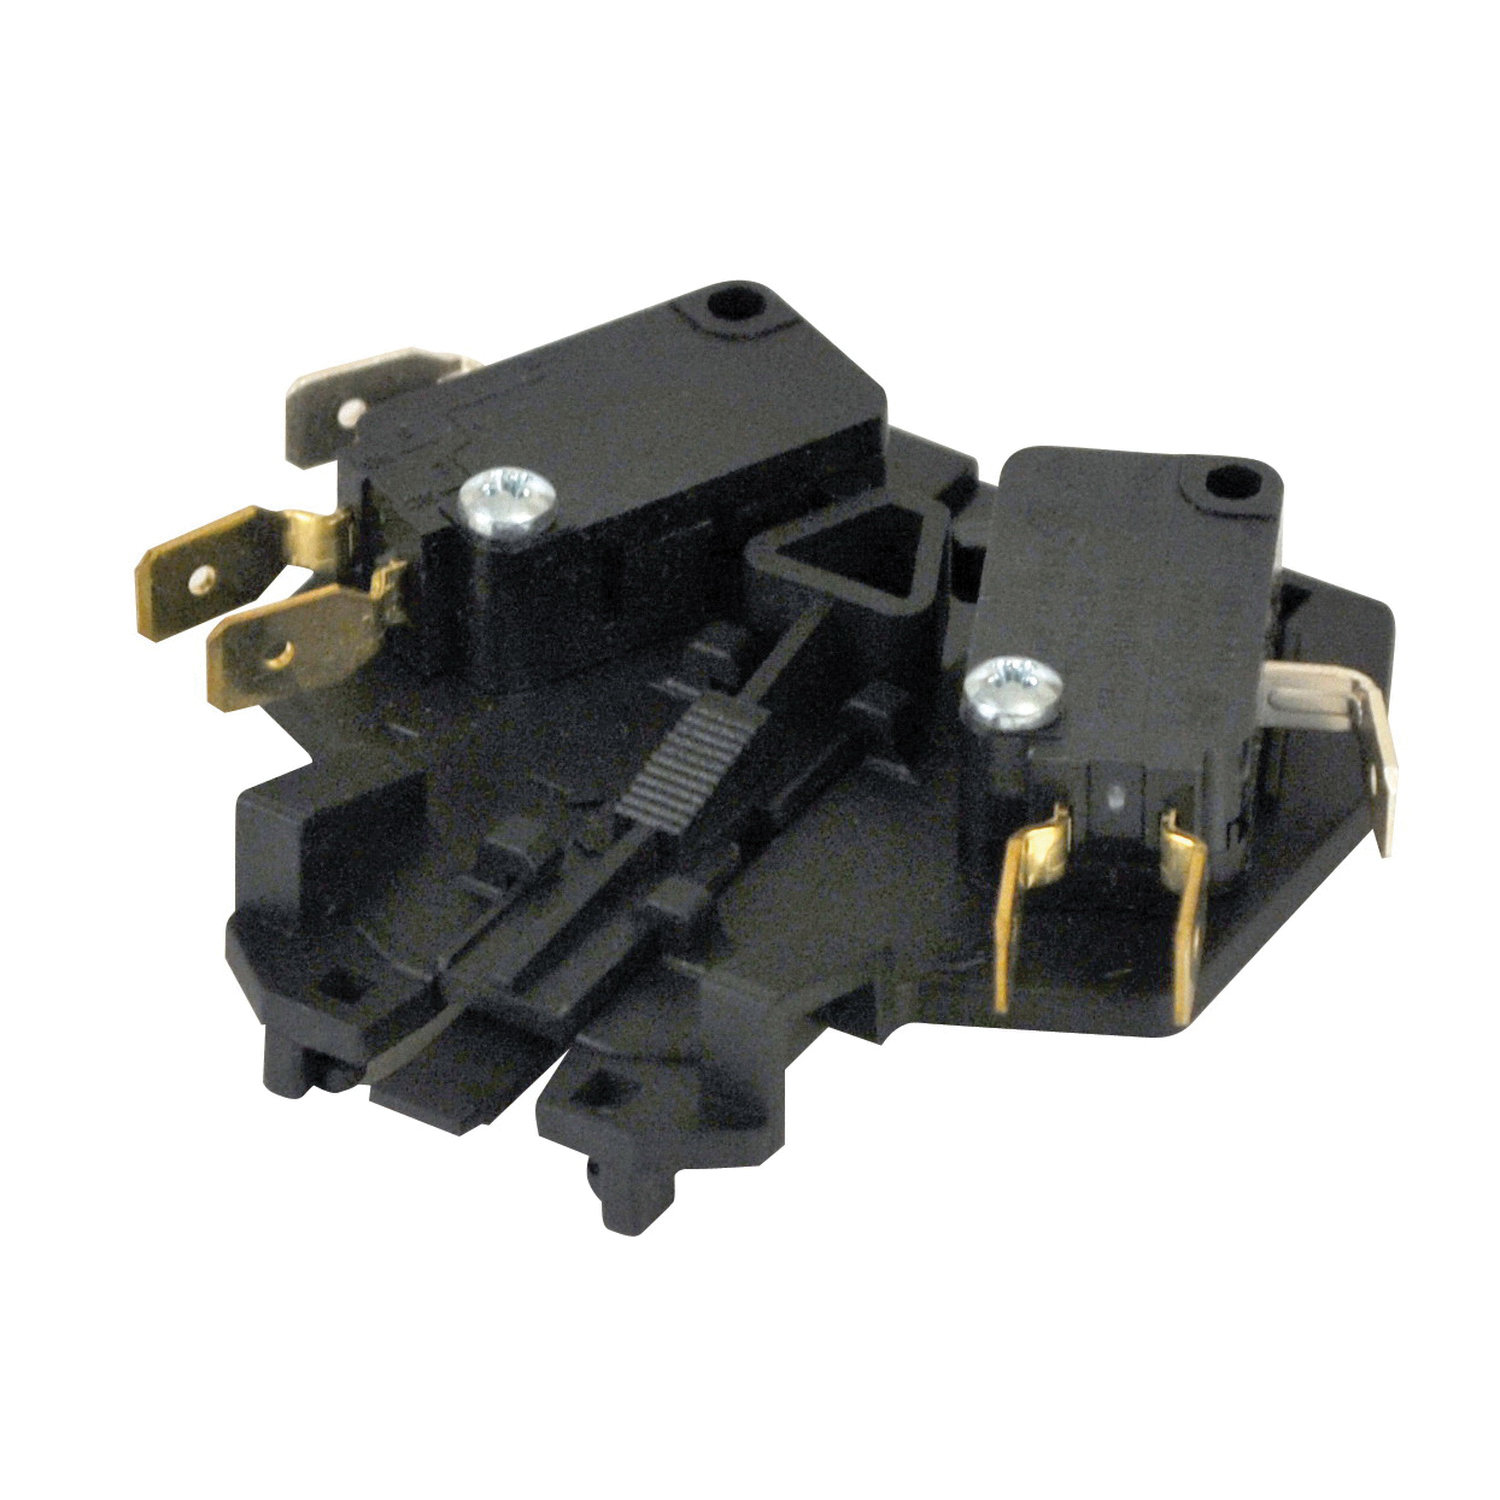 Mars® 61615 Professional Grade Auxiliary Switch, 6 A Full Load, 11 A Resistive, SPDT Contact